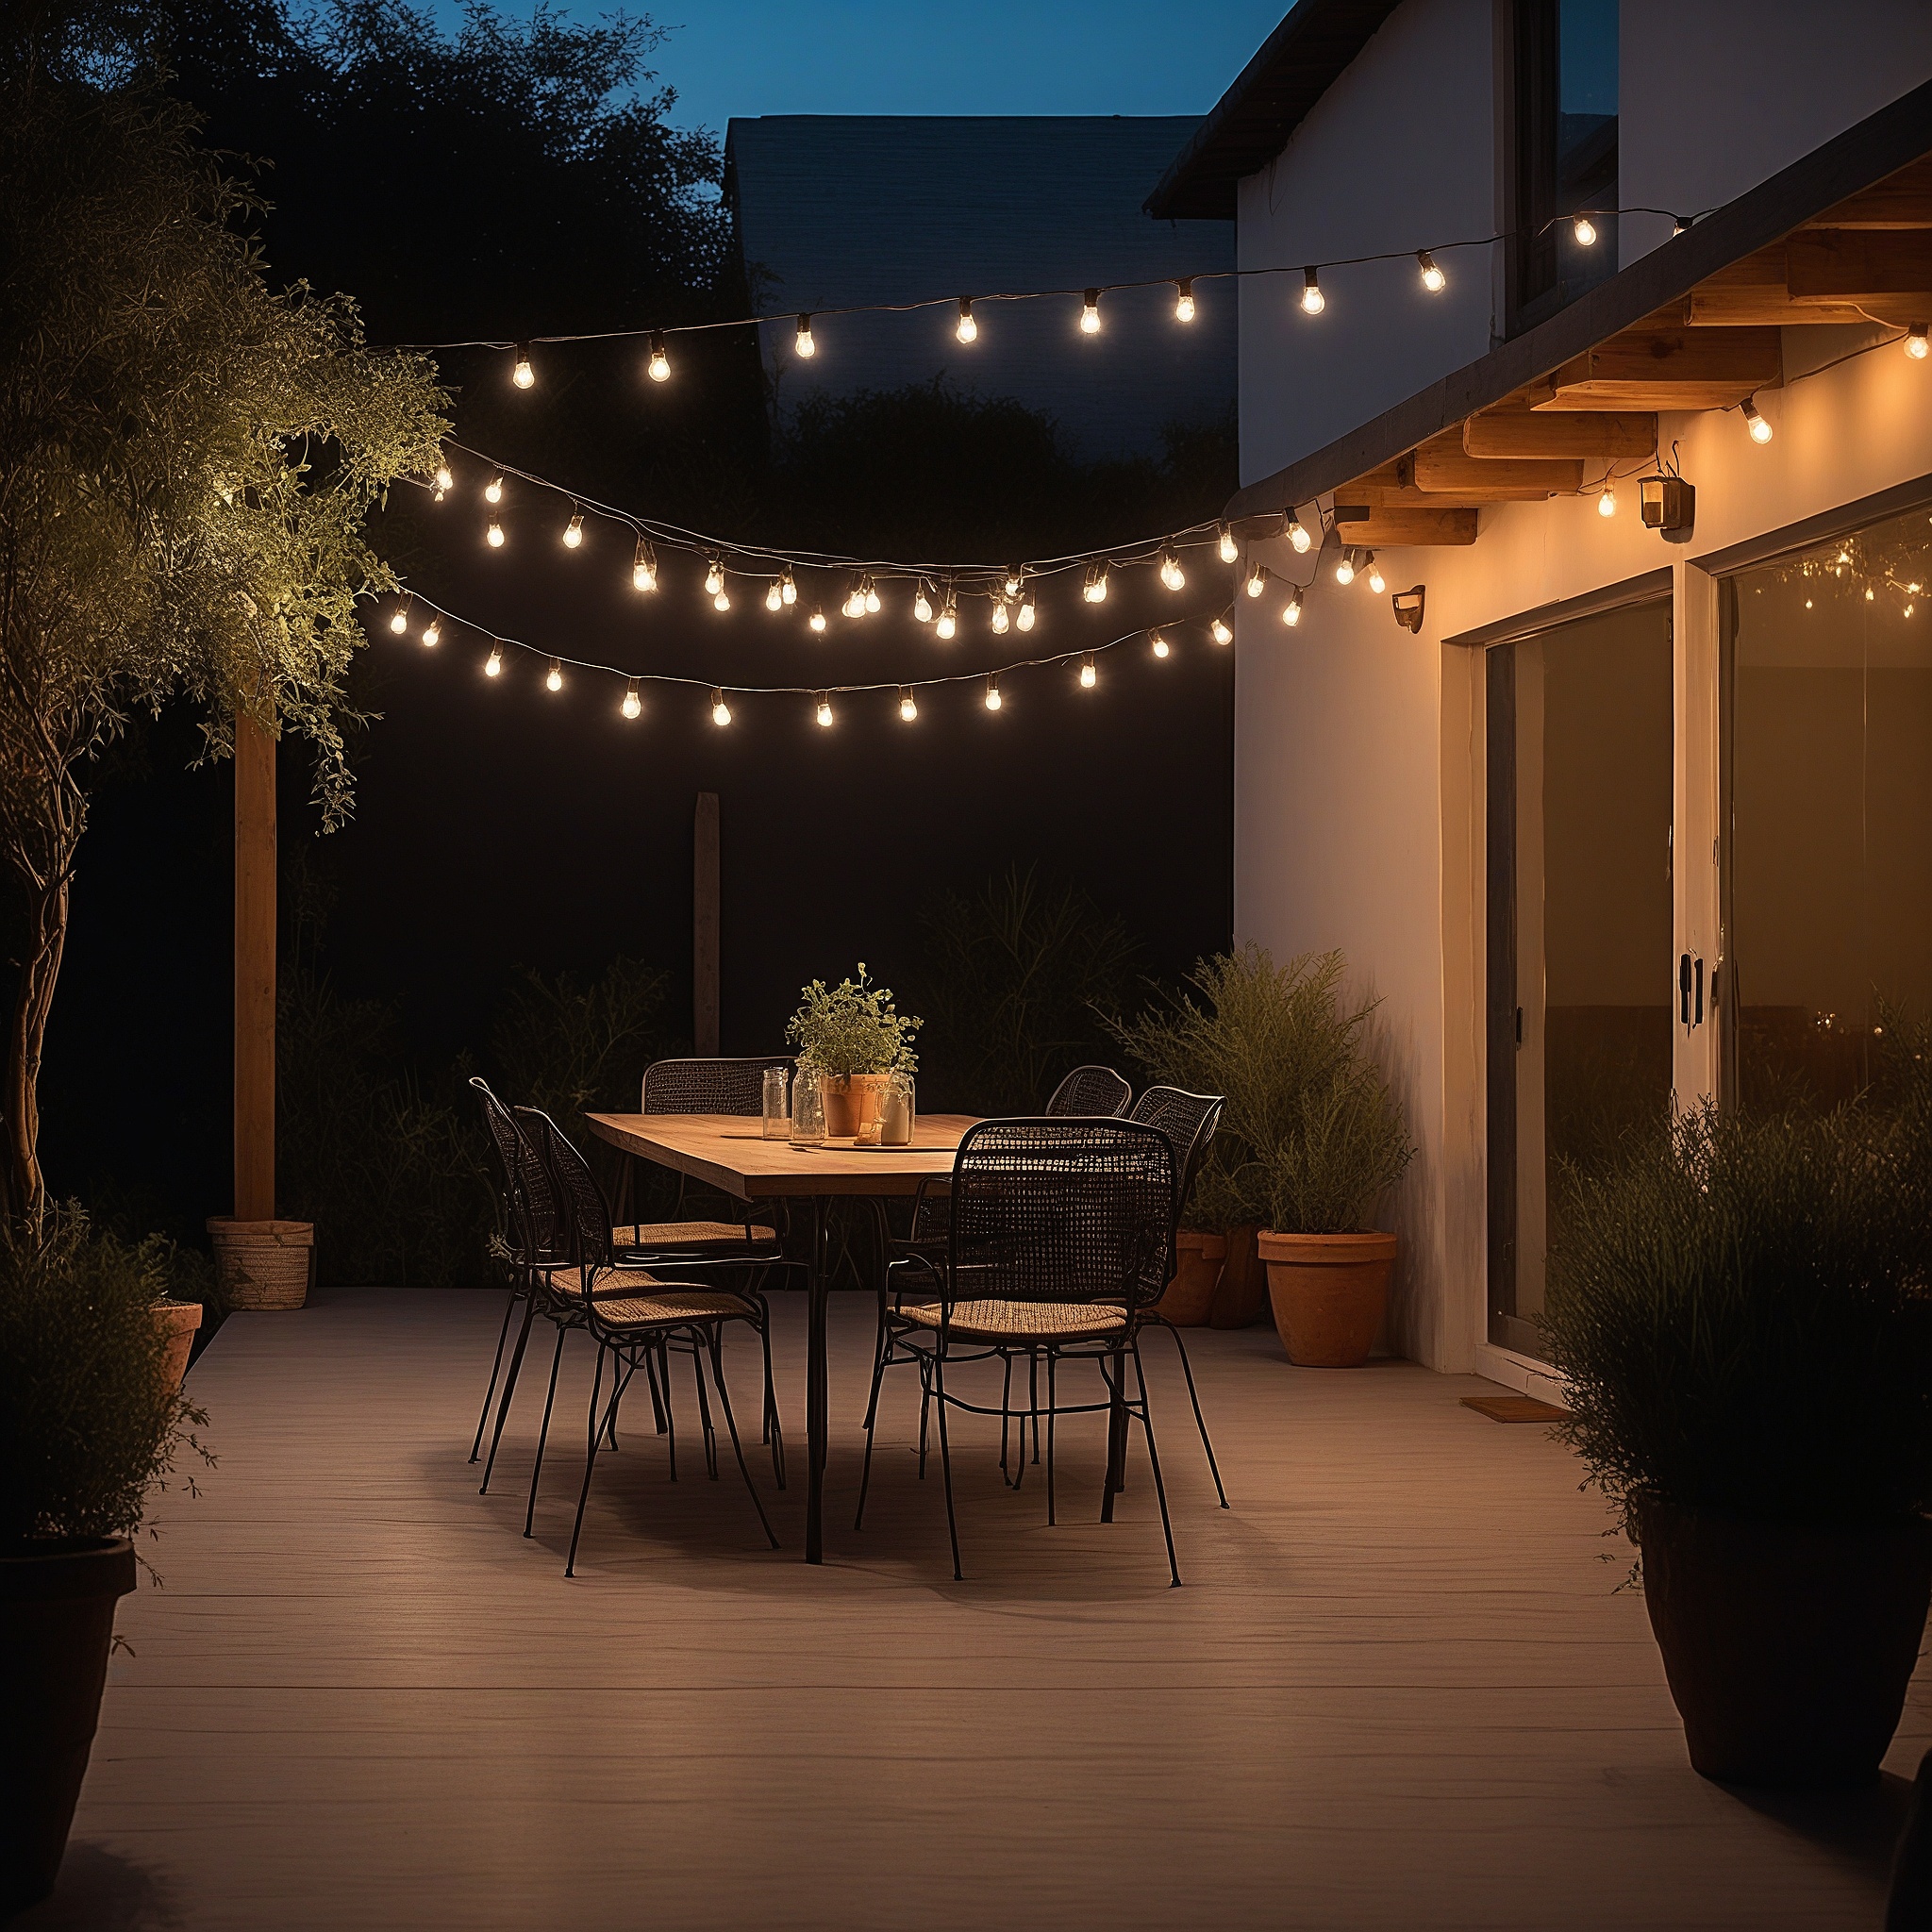 String Lights Hanging Above a Patio Area